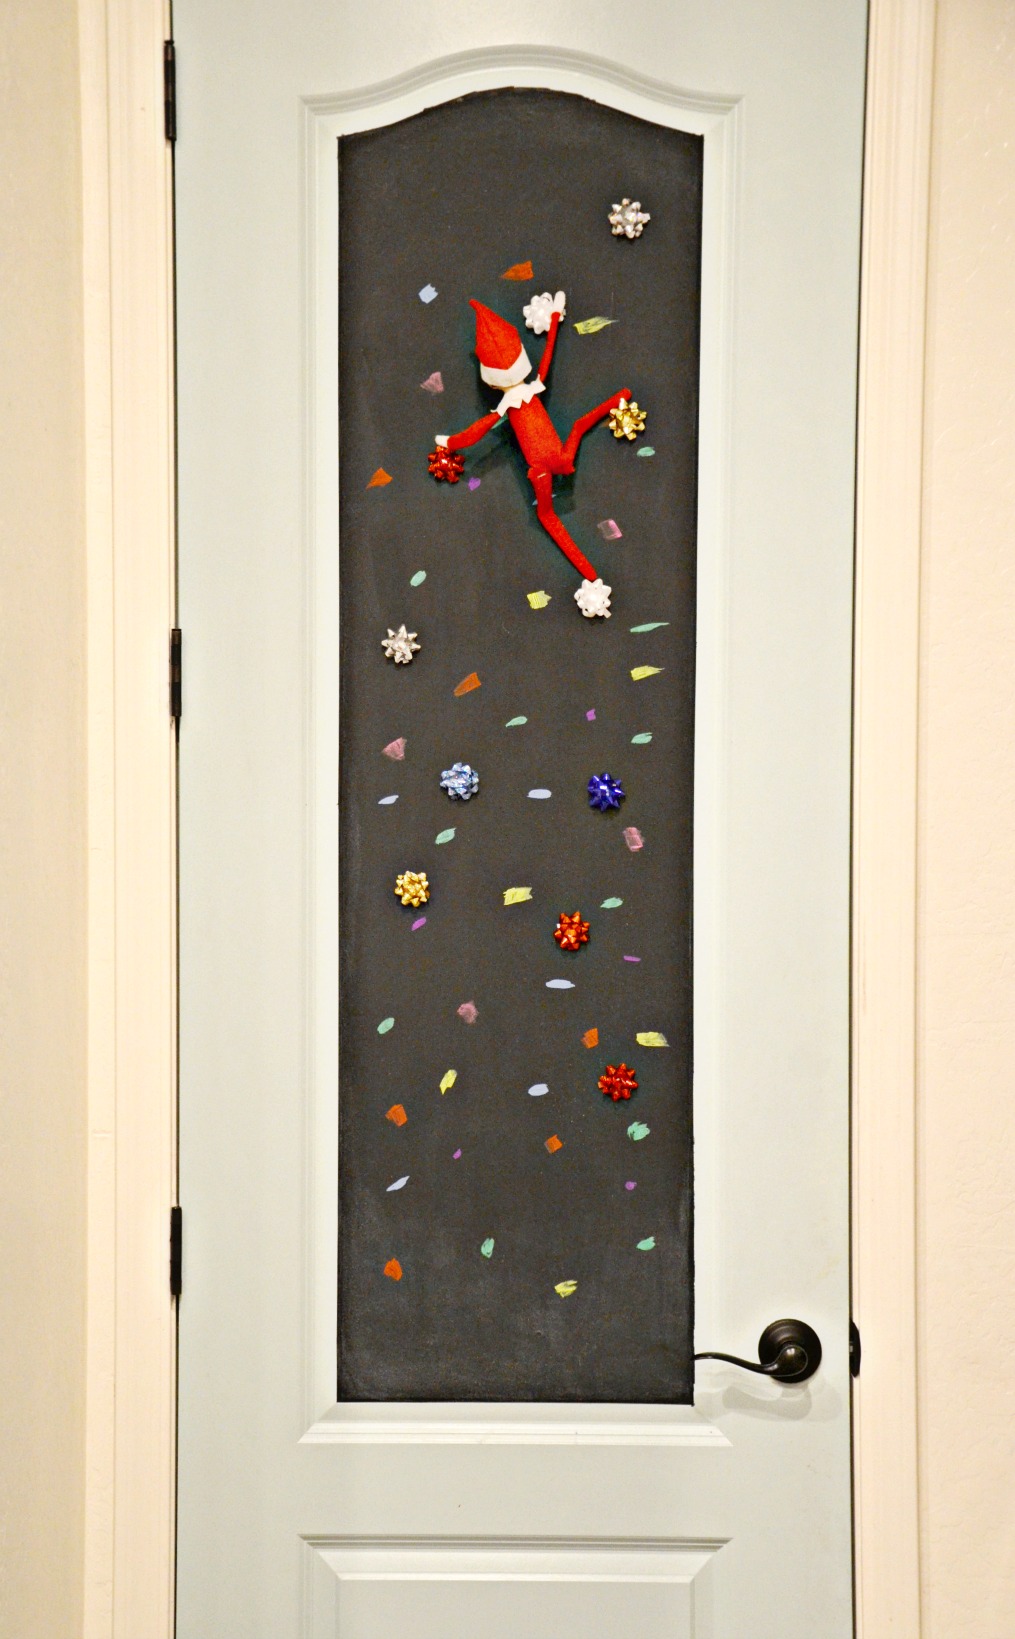 The rock climbing elf is an easy elf on the shelf idea to surprise your children and allow the elf to show off his or her rock climbing skills!